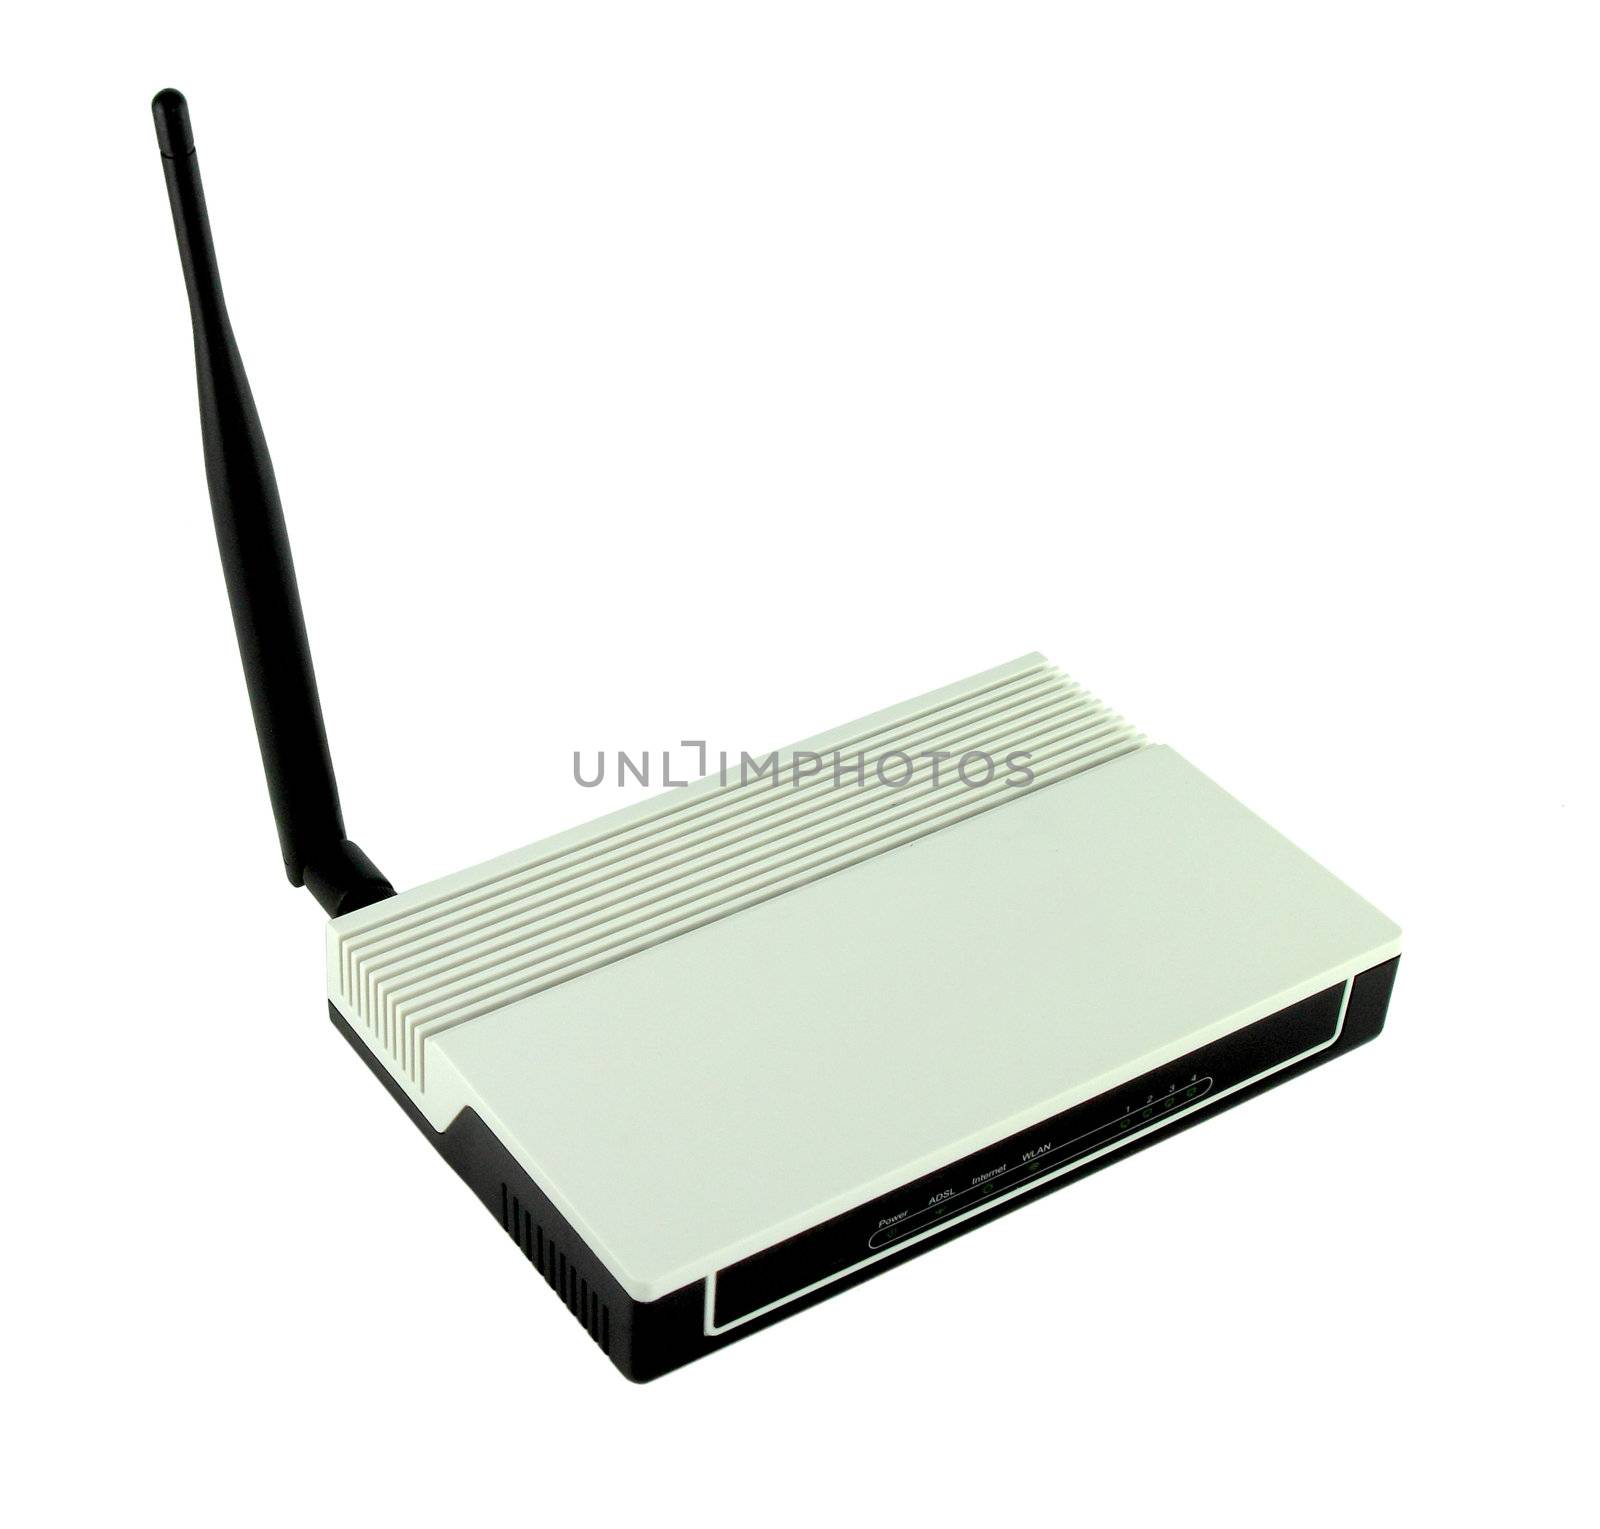 Wireless router isolated on white background by geargodz